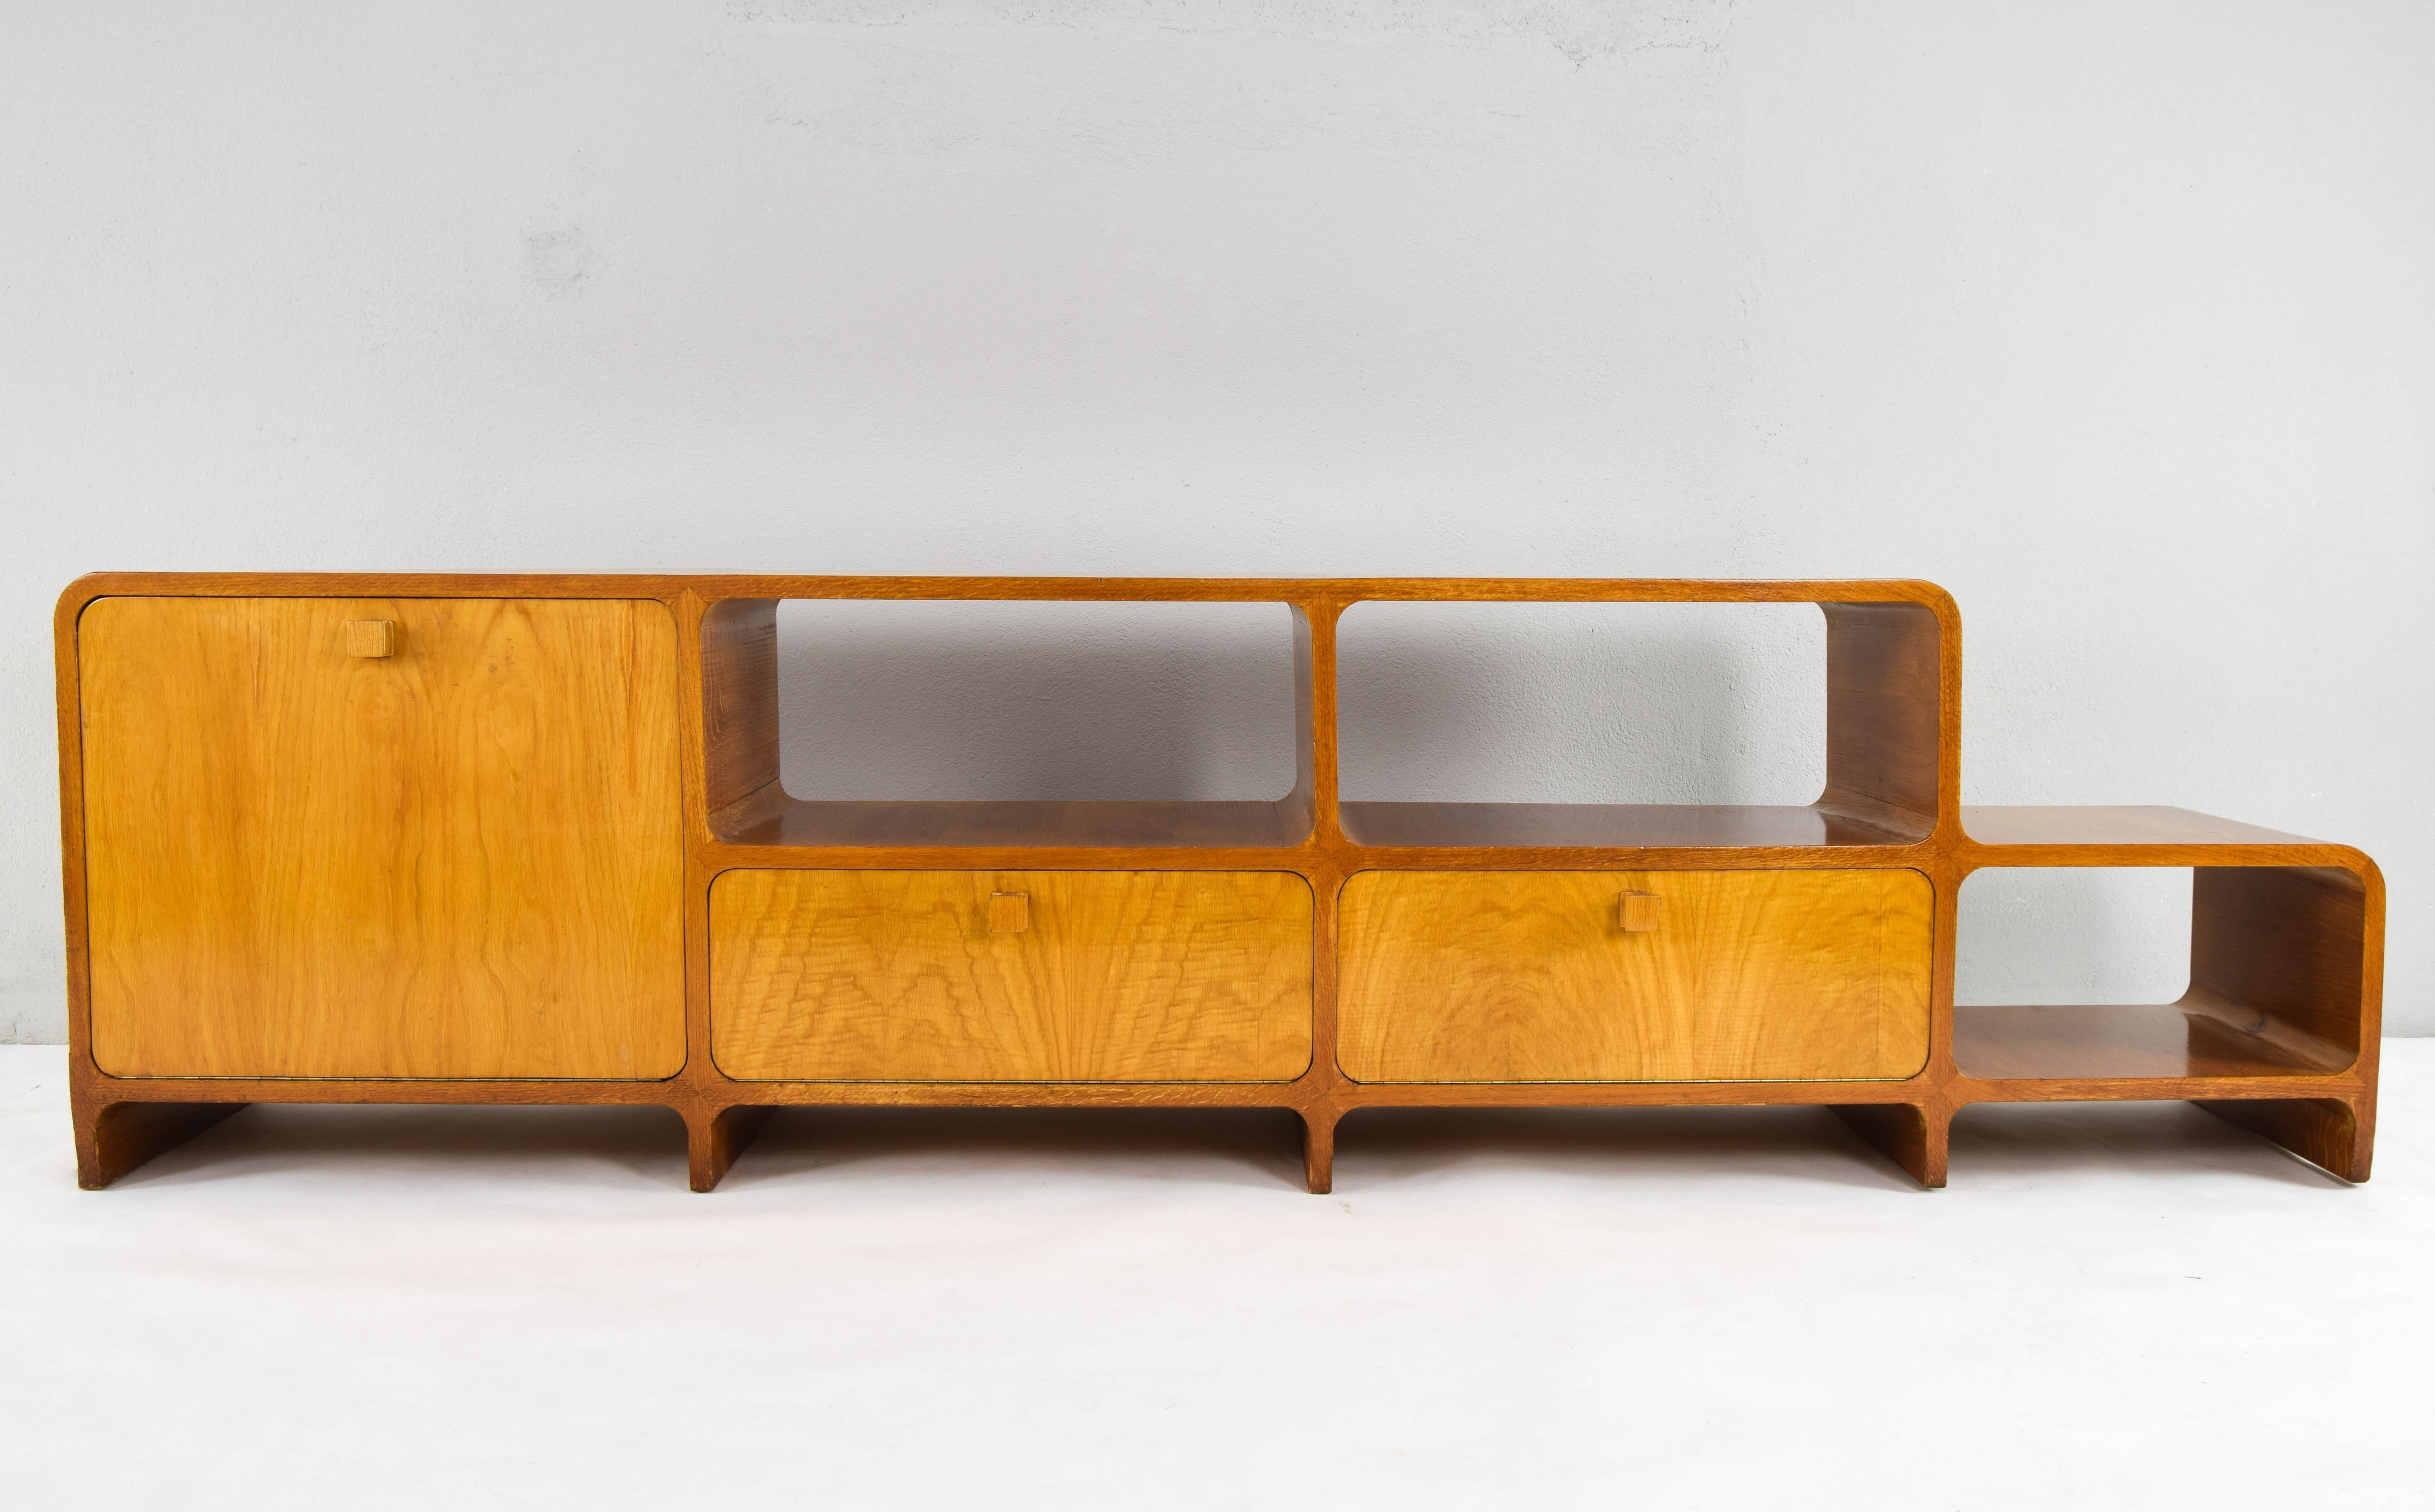 Exceptional Mid-Century Modern veneered teak room divider from Denmark and manufactured in the 1960s.
Its handles are square and made of wood.
Large and very robust double-sided Bauhaus sideboard. With all its curved angles and different levels of